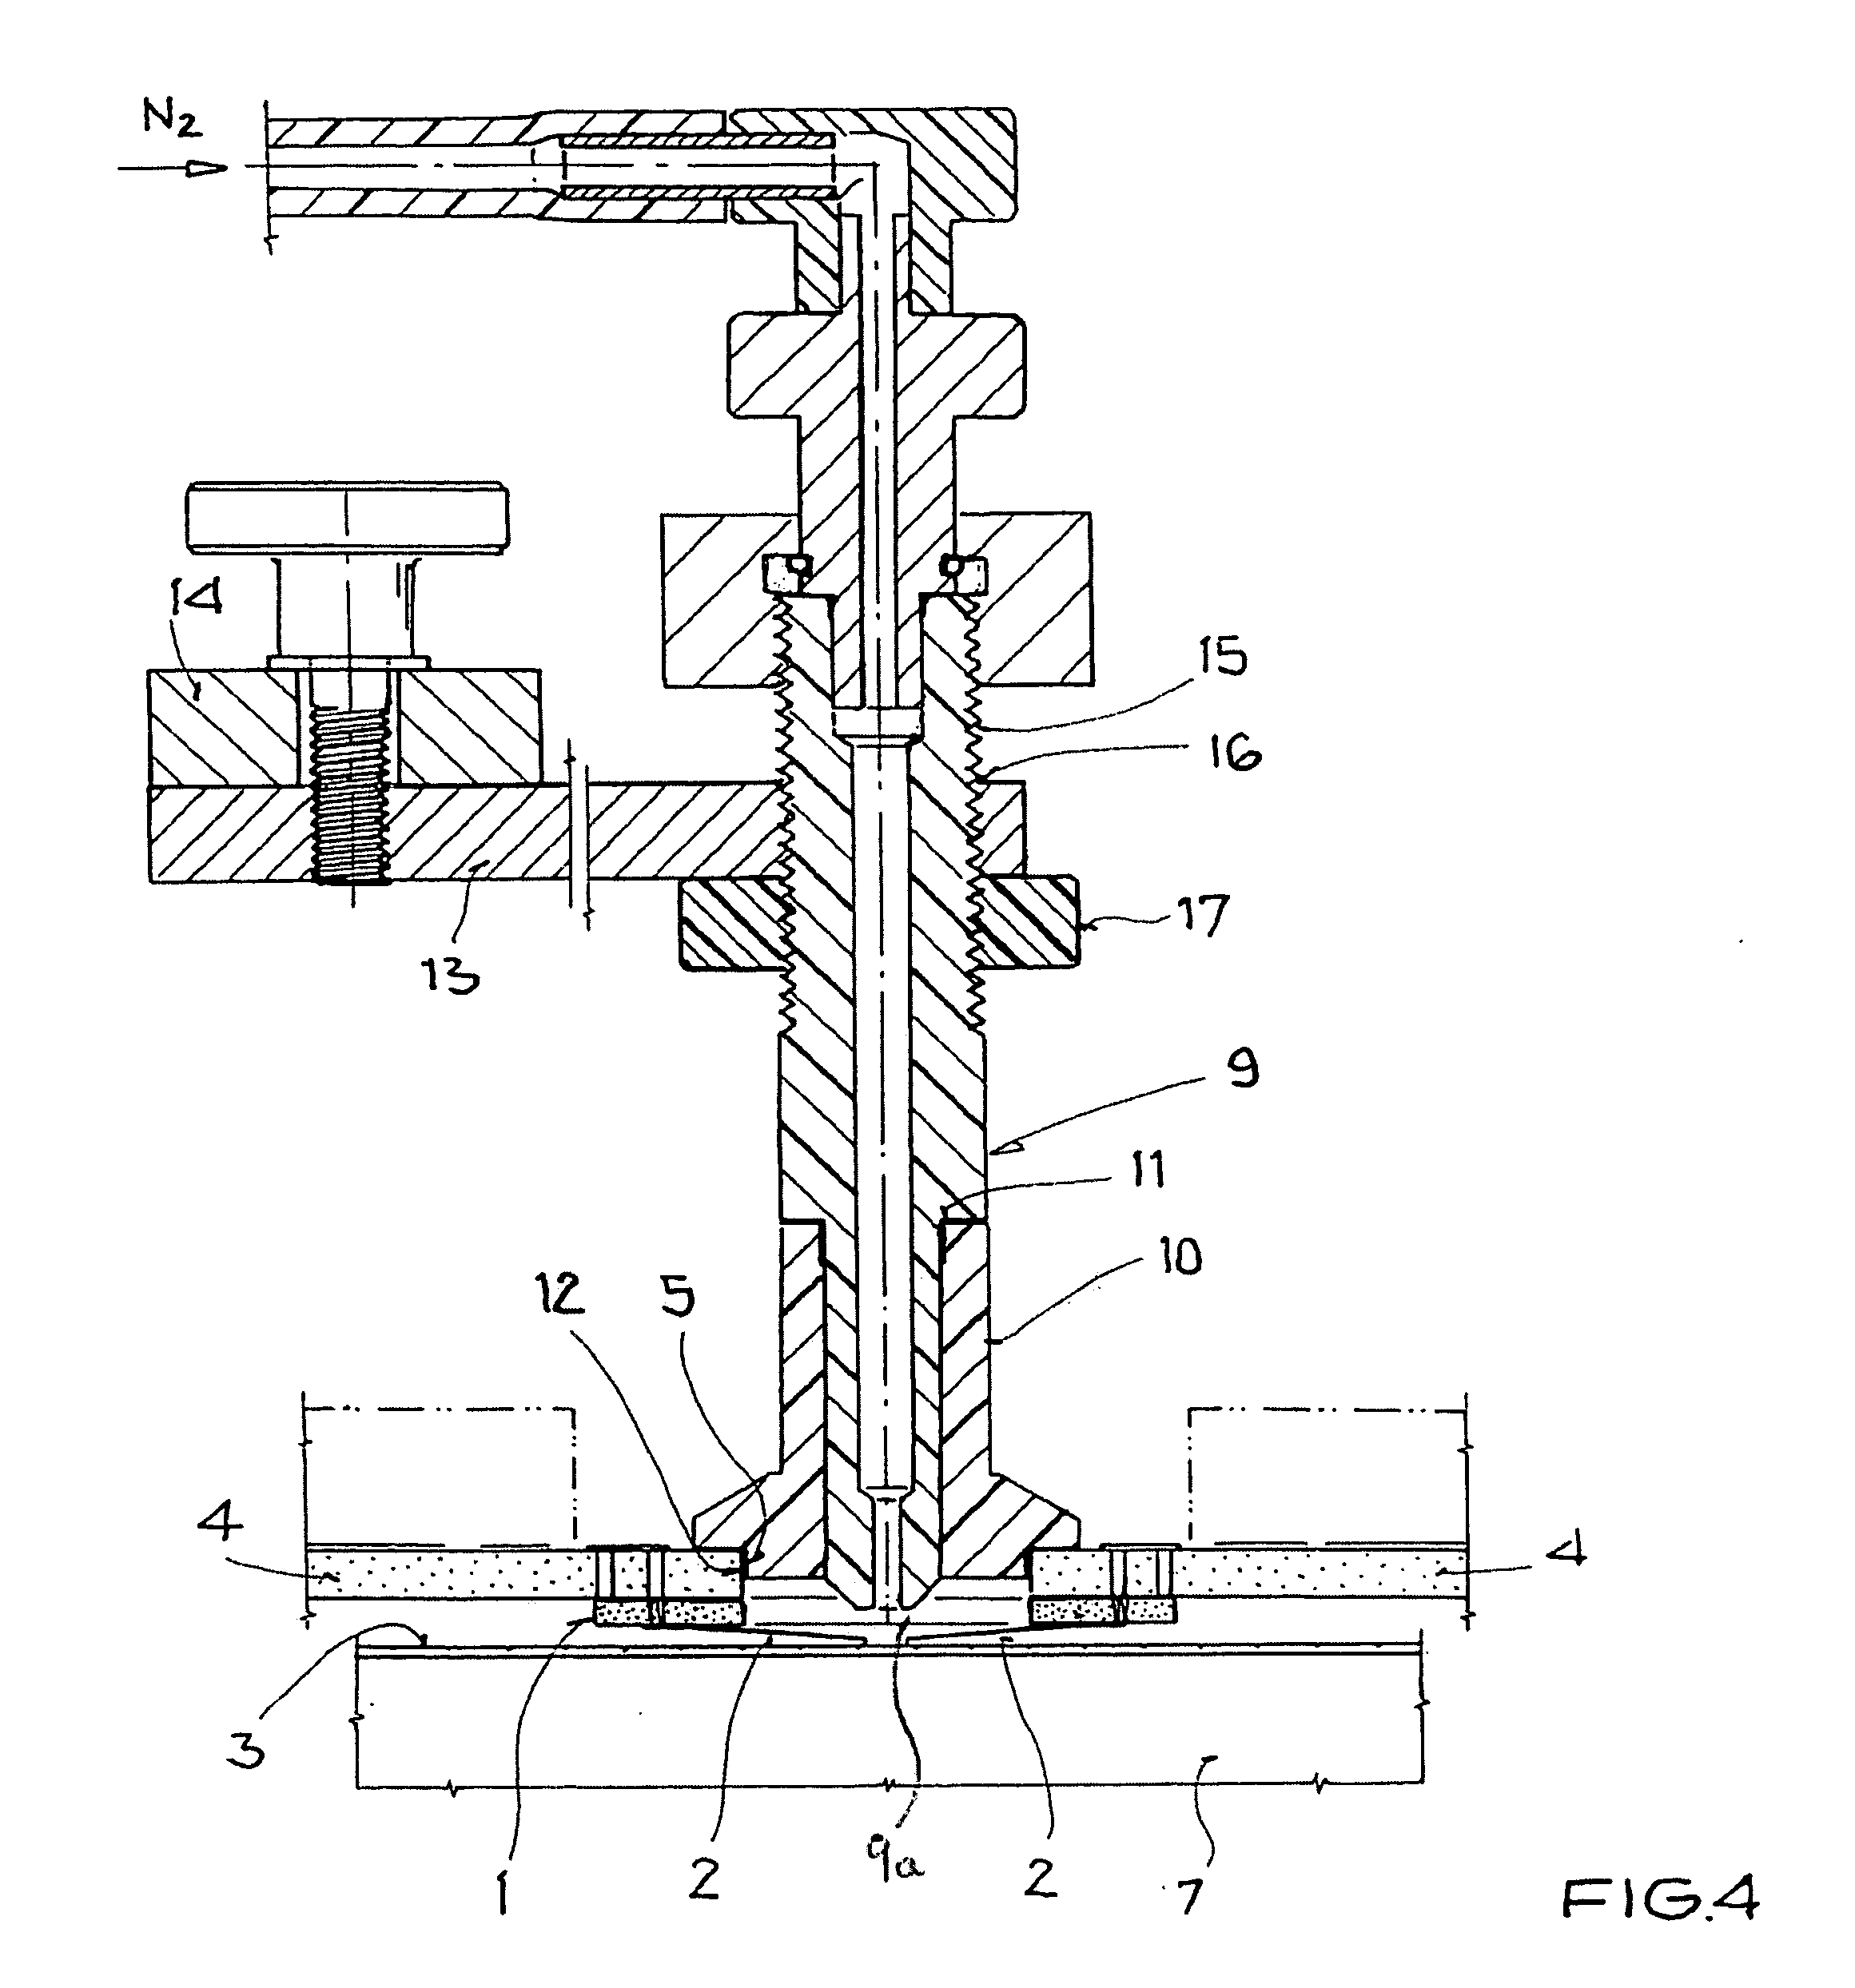 Apparatus for testing semiconductor circuits